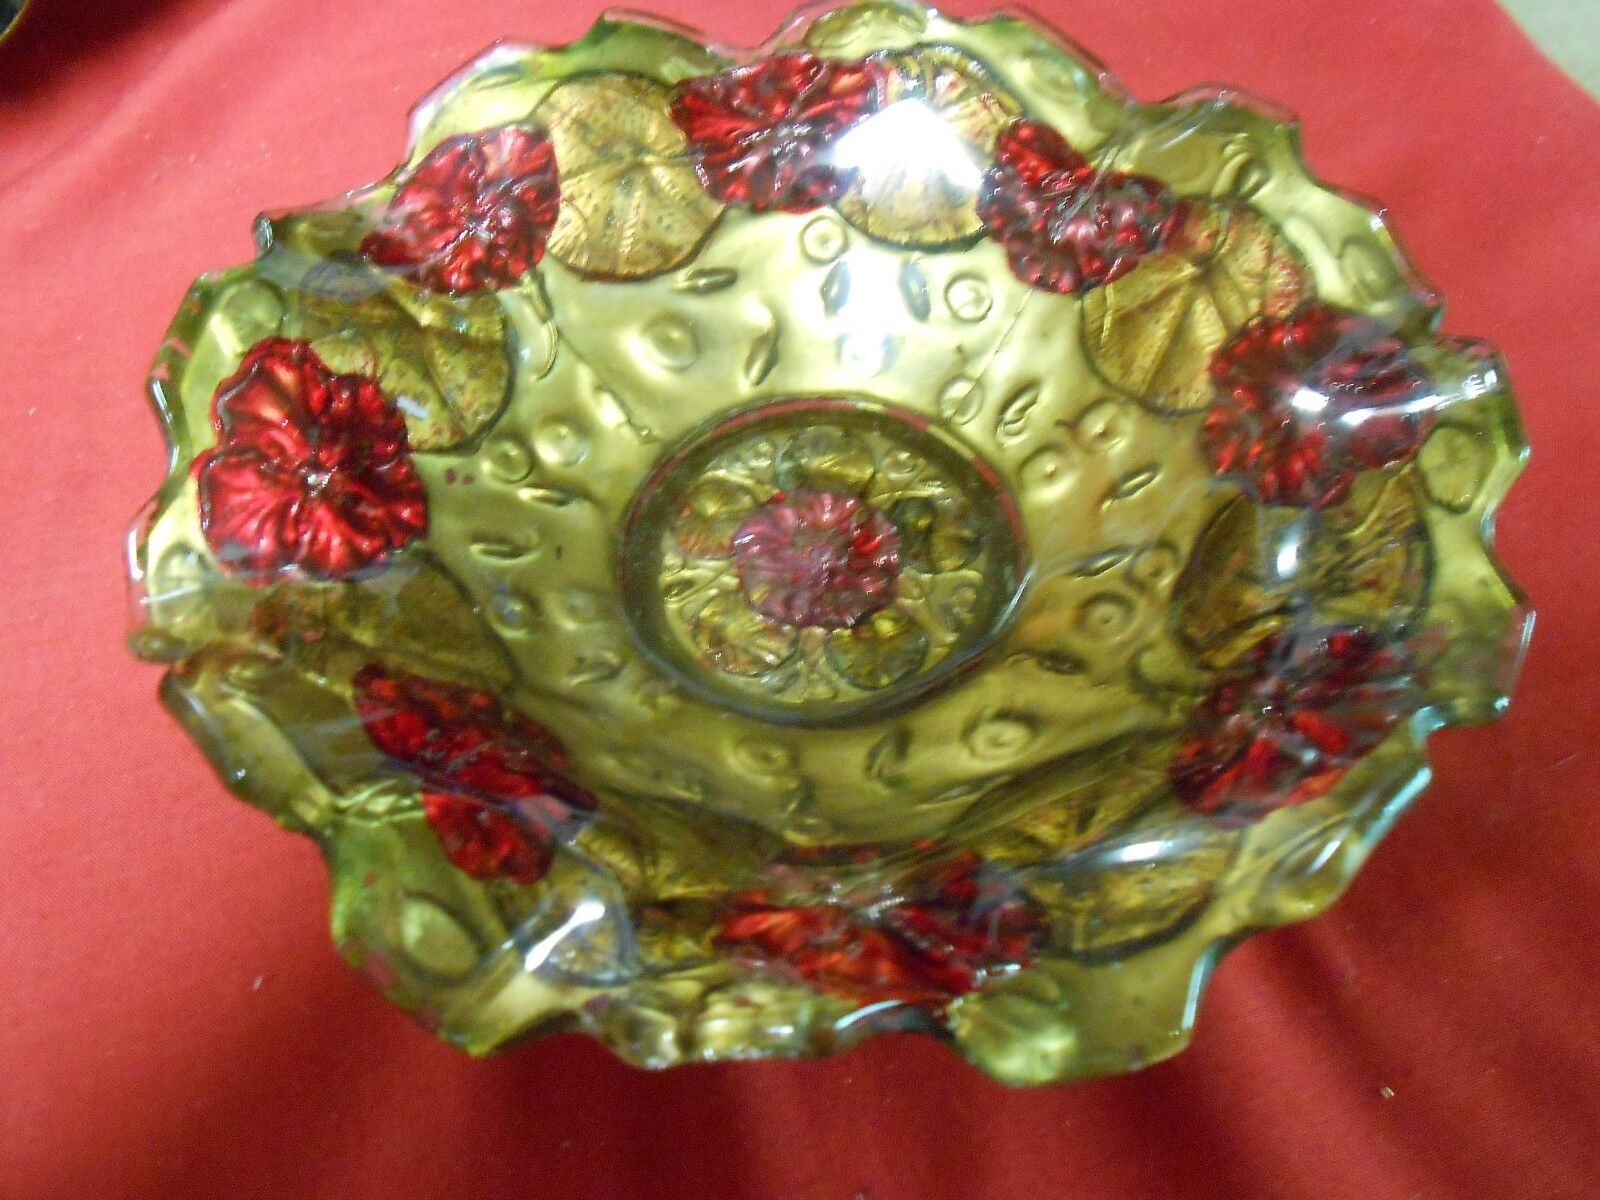 Magnificent .Antique GOOFUS GLASS  Candy Dish.. 1920\'s..Probably Indiana Glass